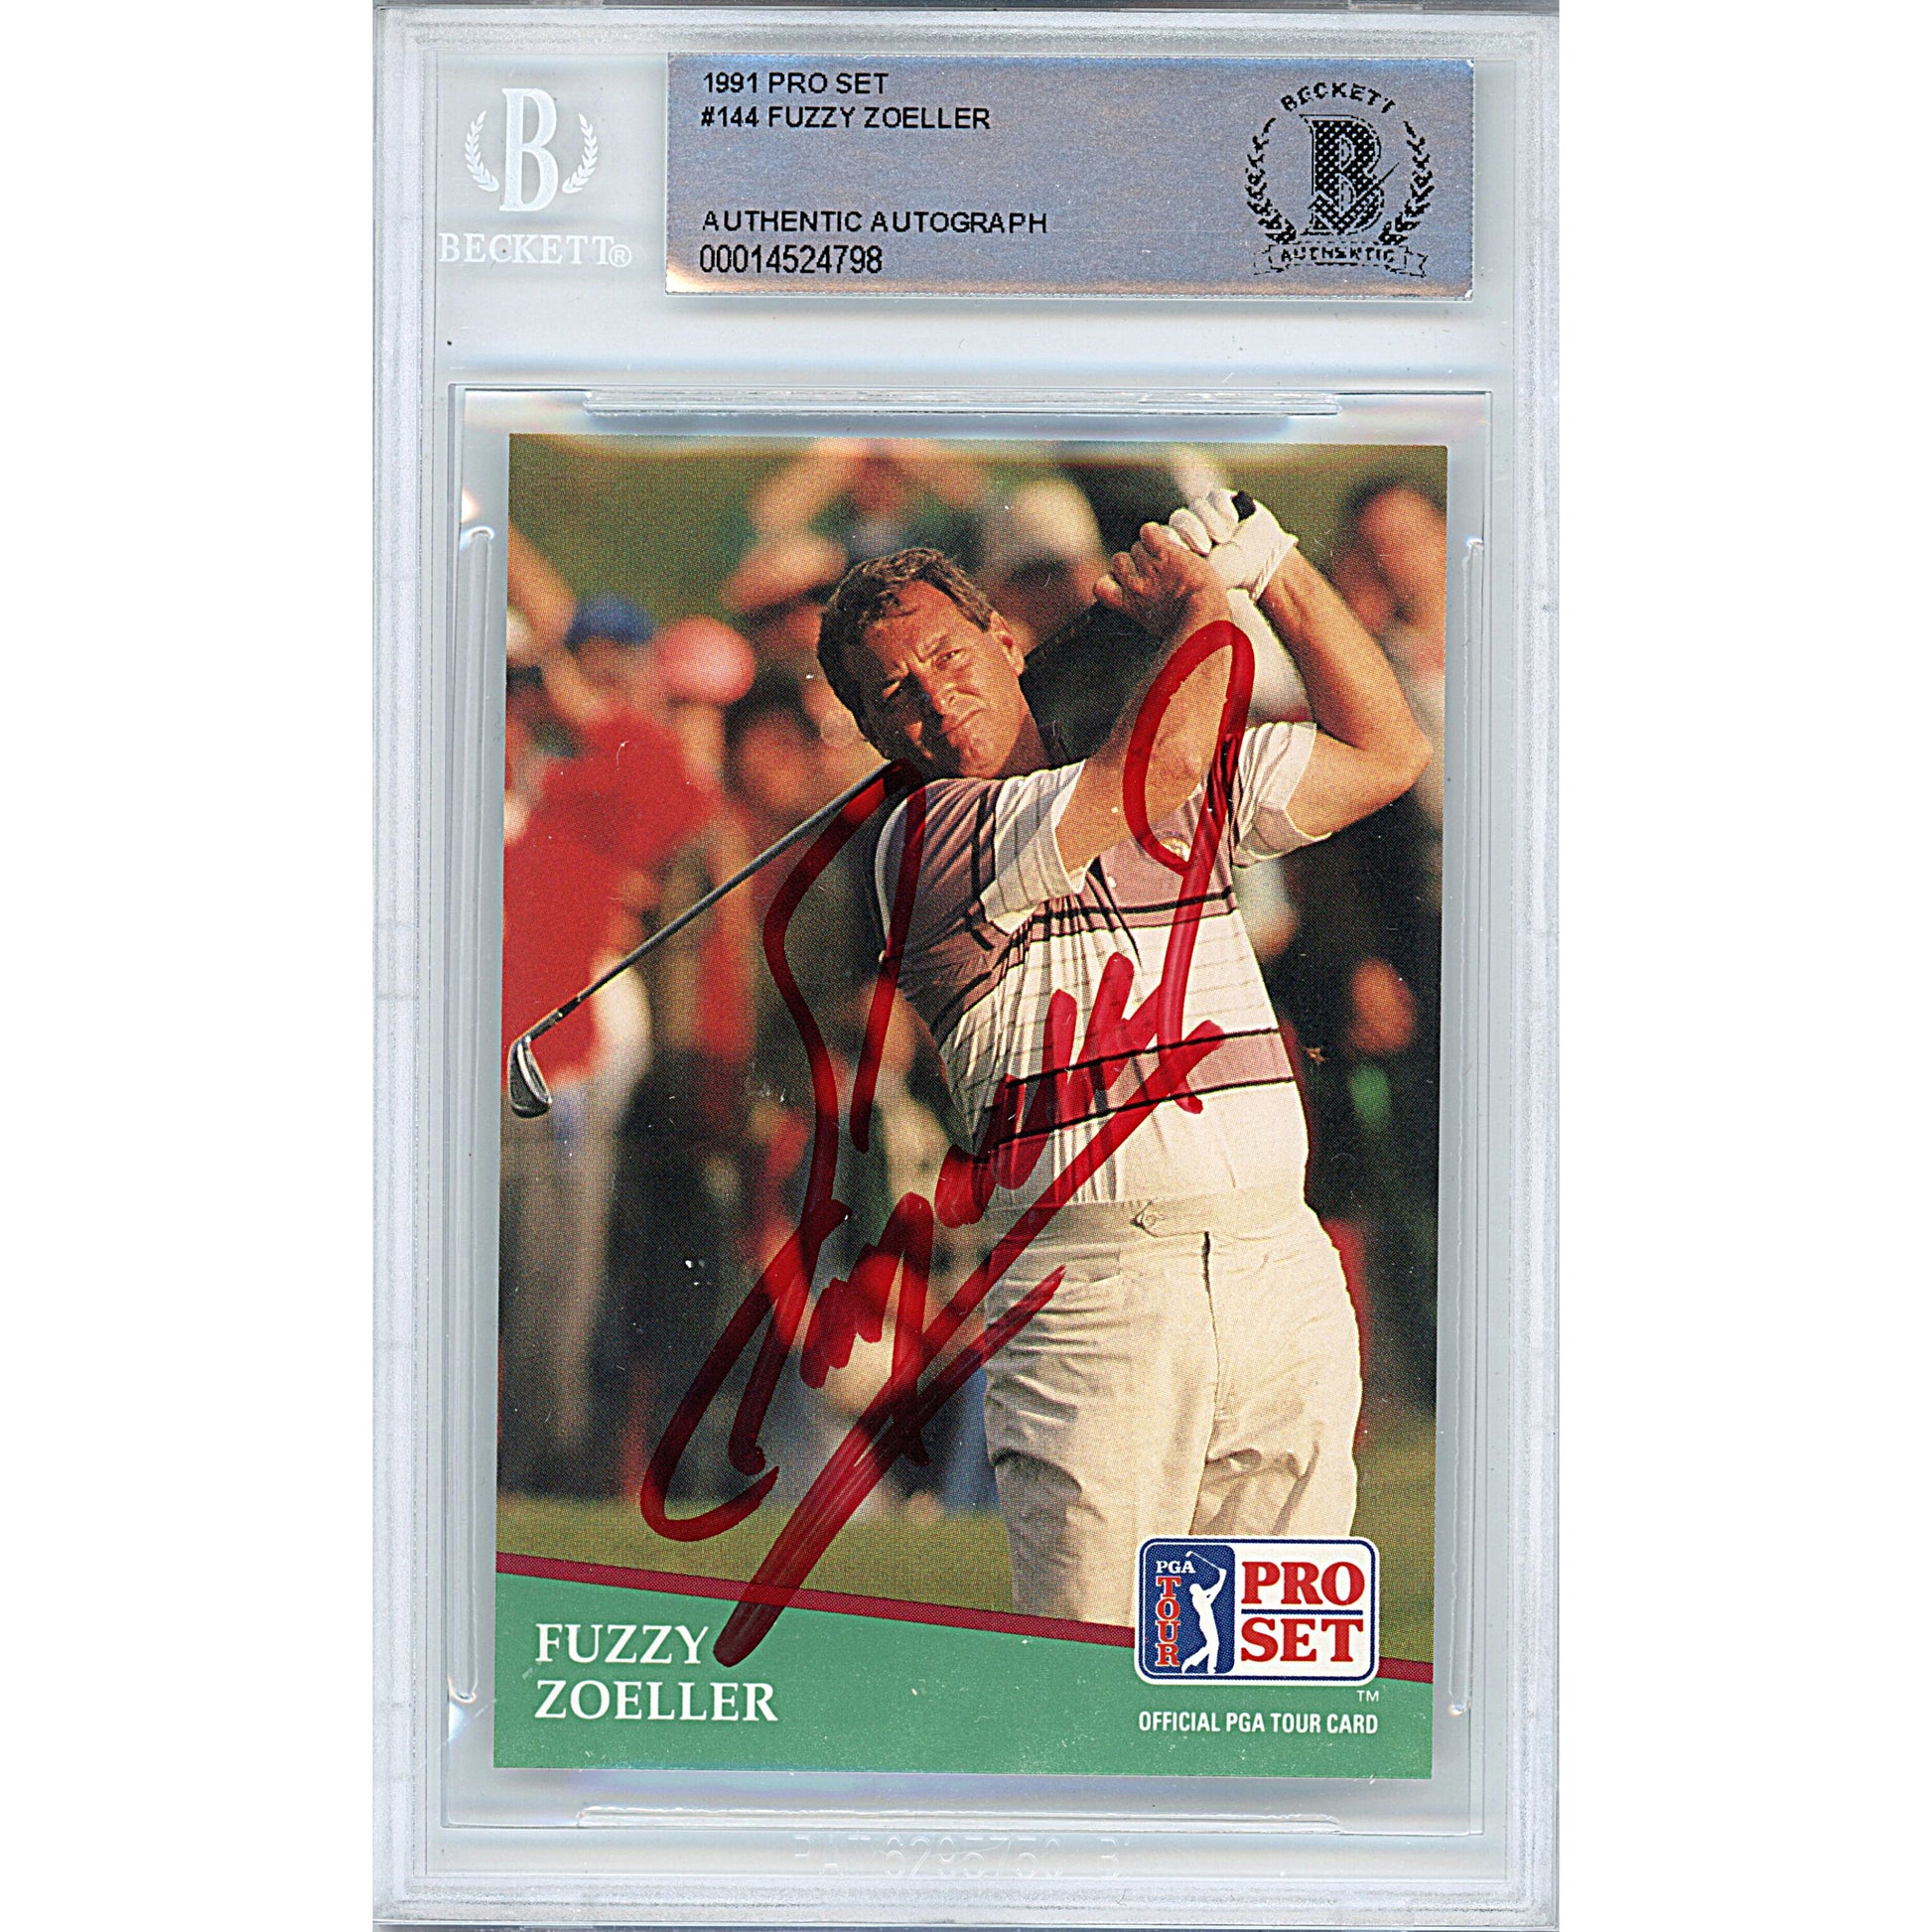 Golf- Autographed- Fuzzy Zoeller Signed 1991 PGA Tour Pro Set Golf Trading Card Beckett Slabbed 101a